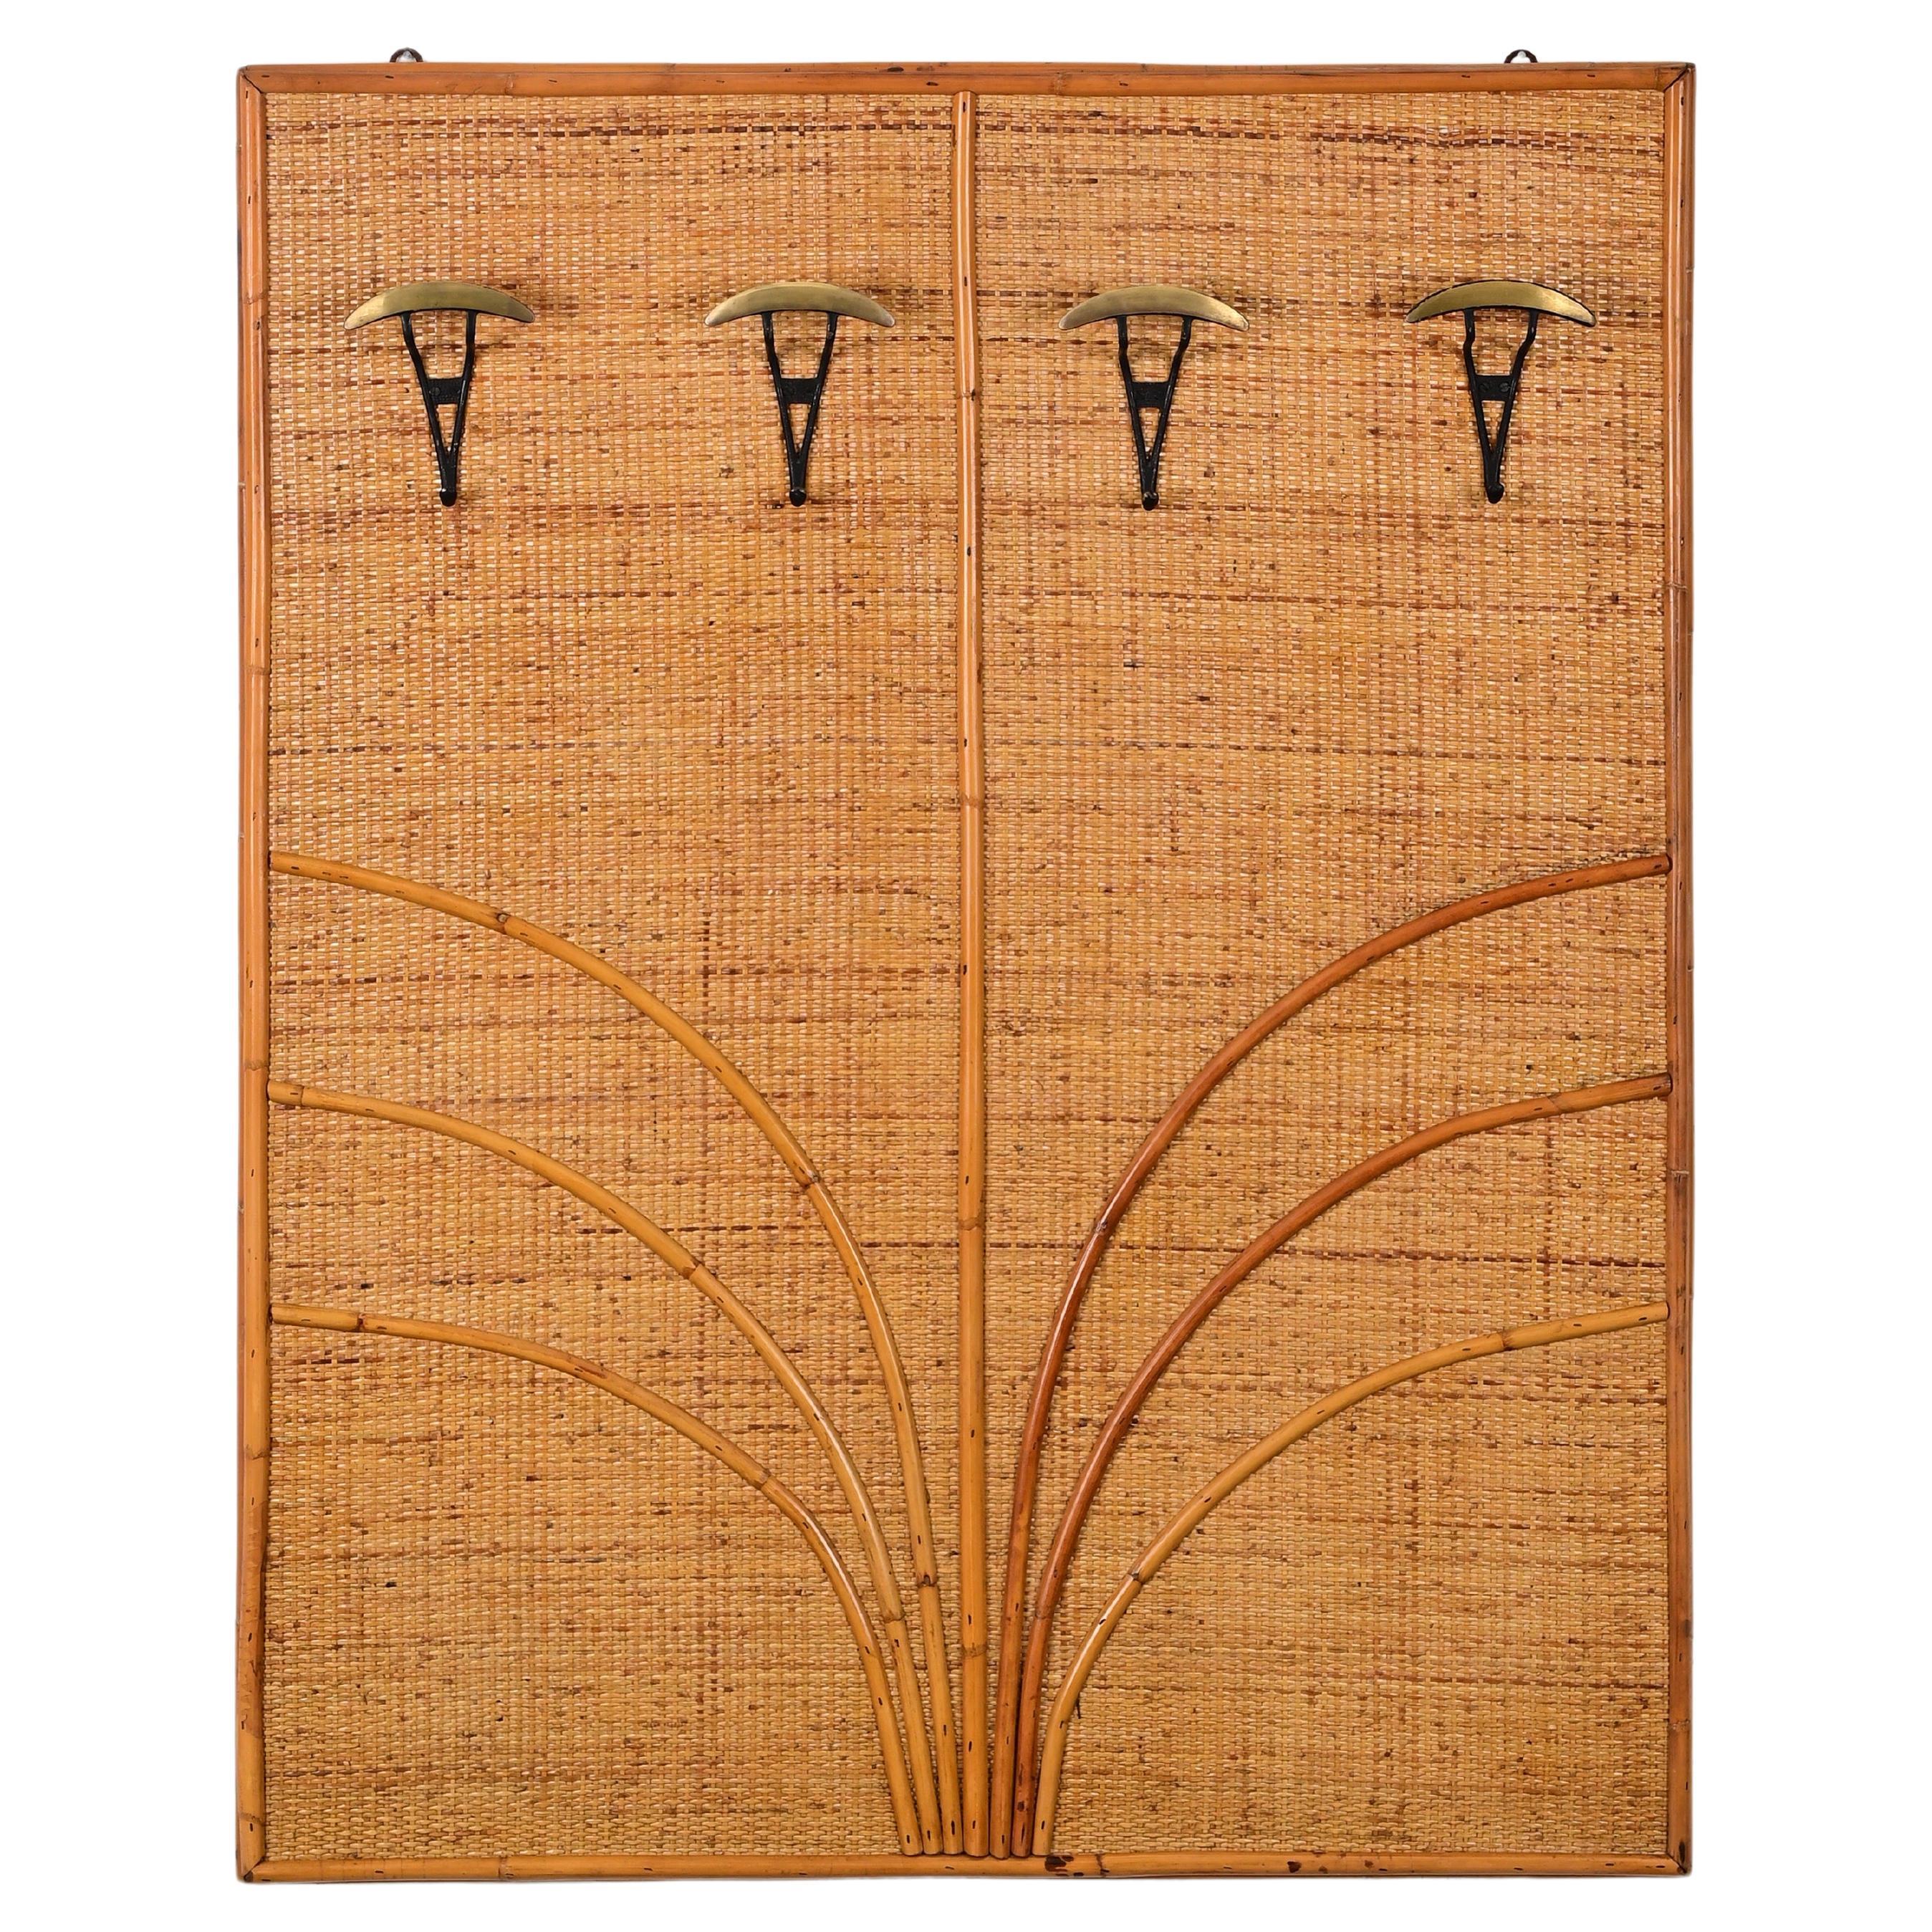 Vivai Del Sud Italian Coat Rack in Rattan, Bamboo and Brass, Italy 1970s For Sale